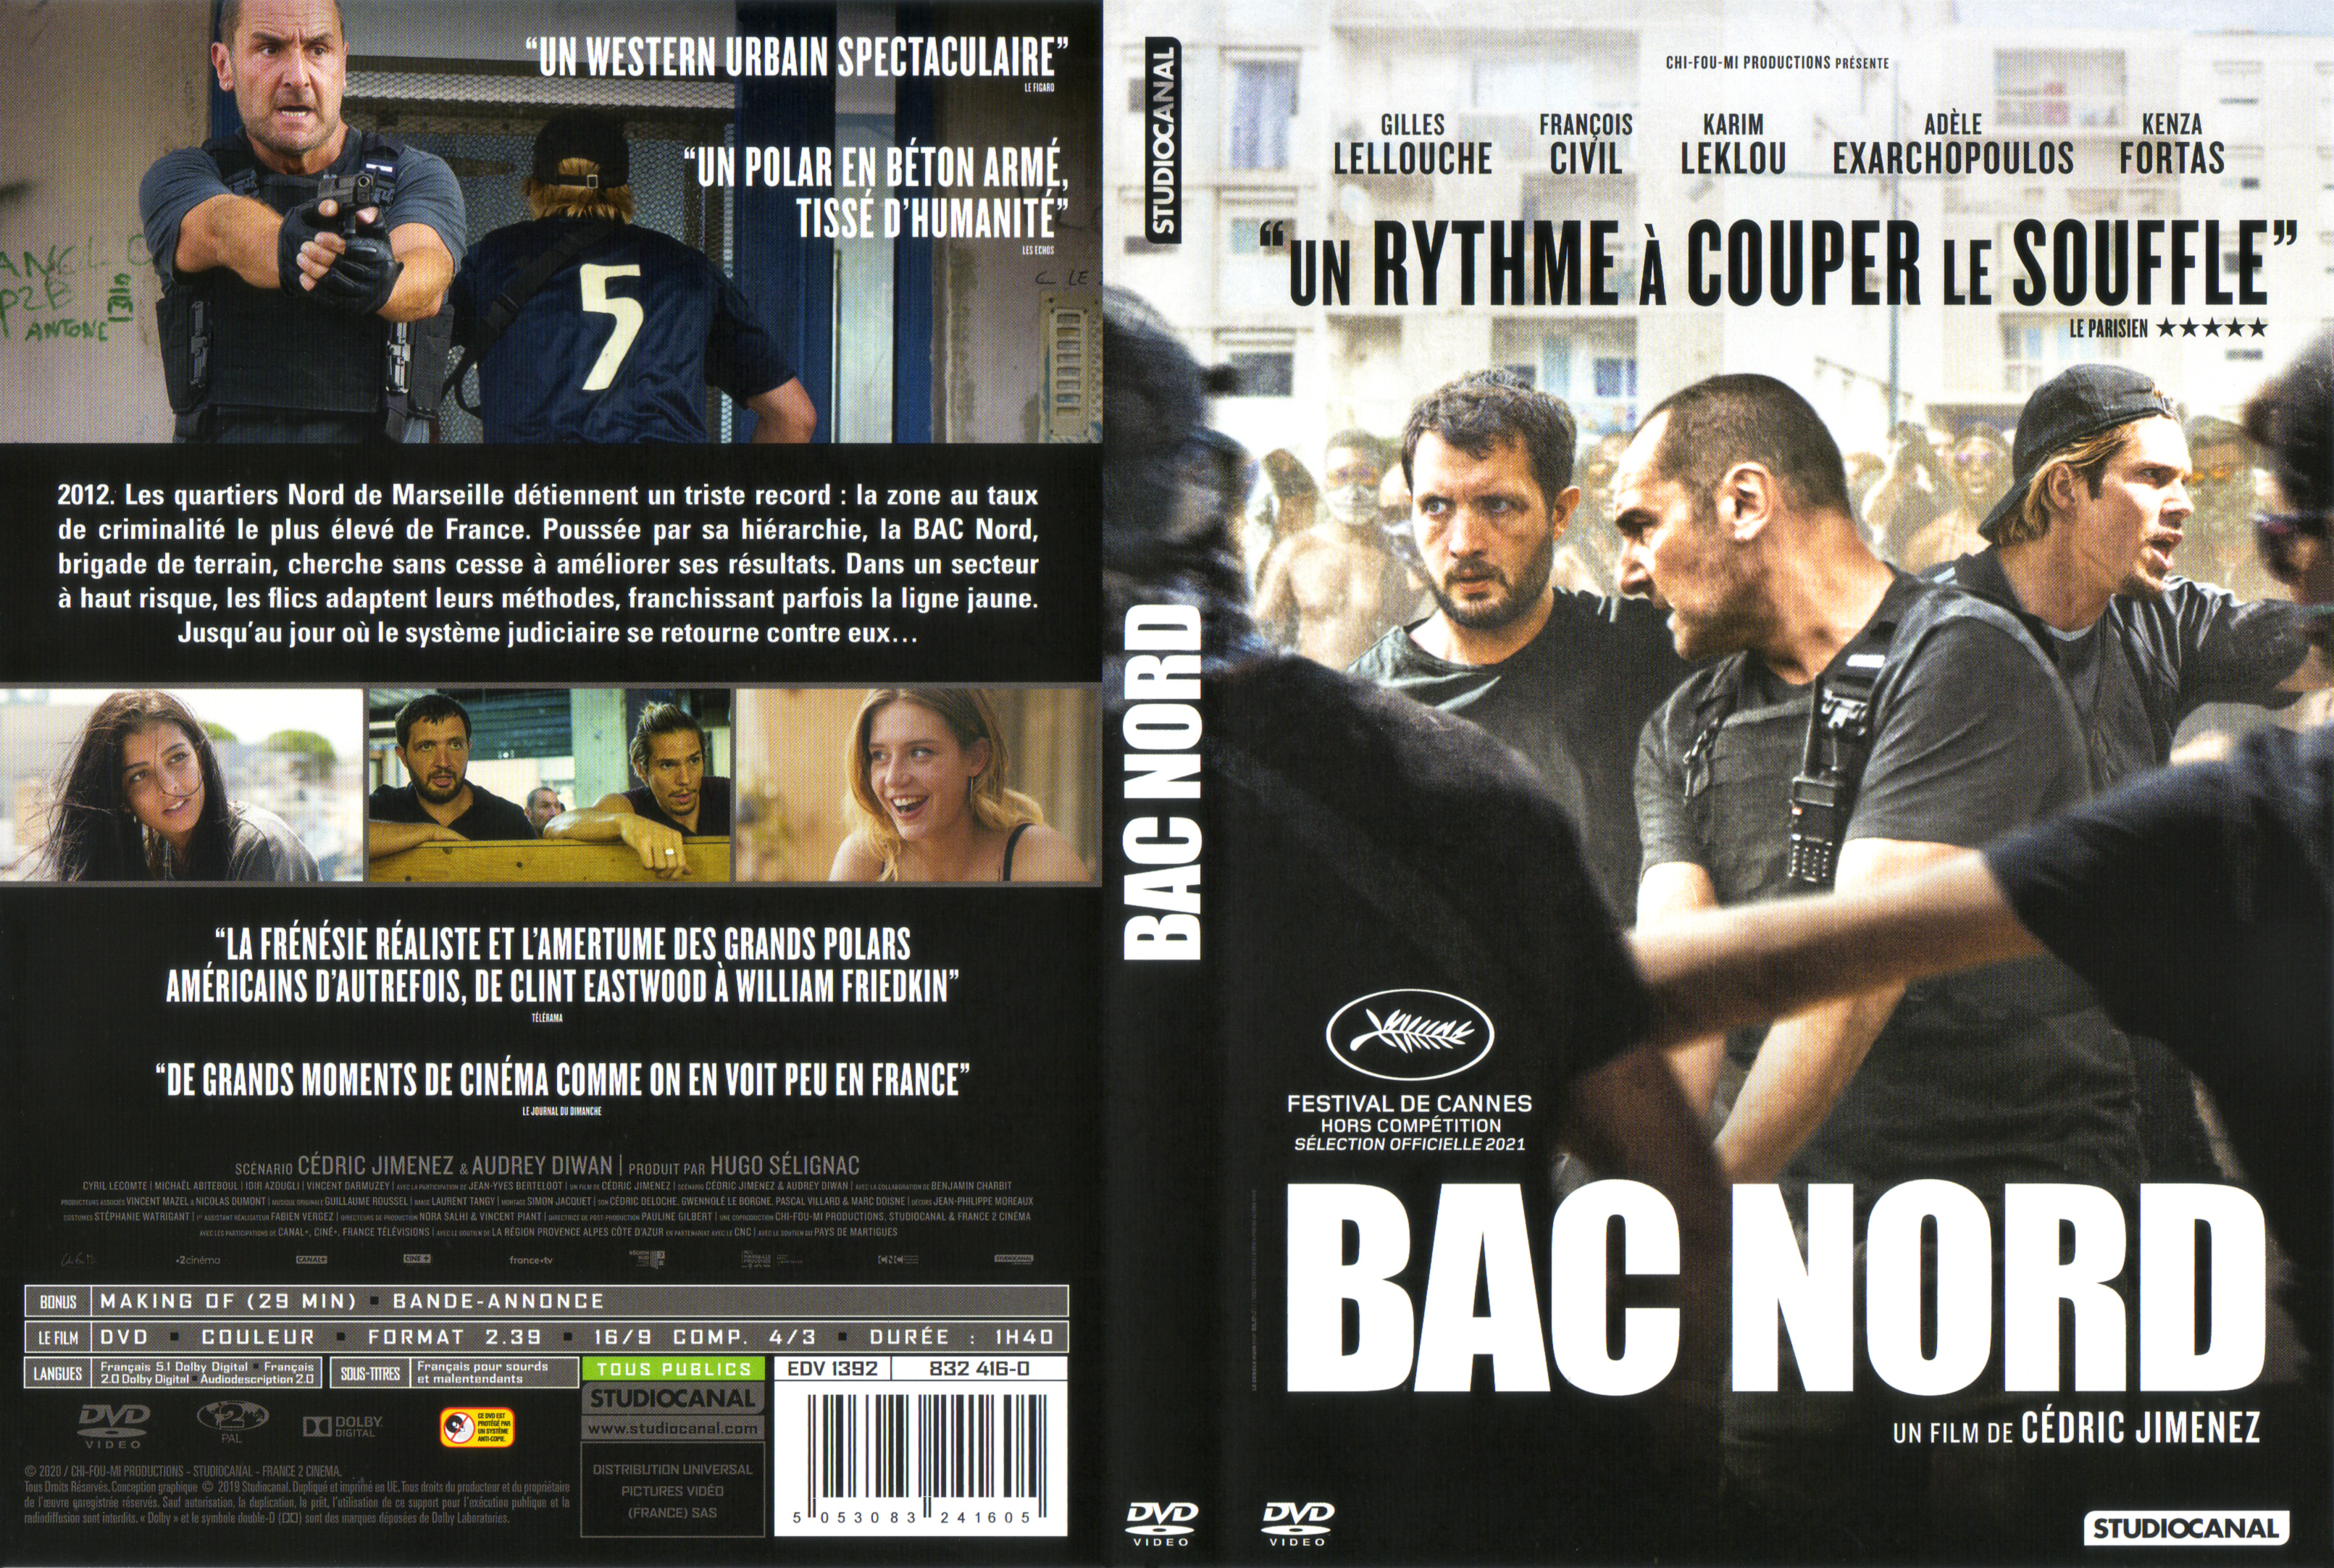 Jaquette DVD Bac nord